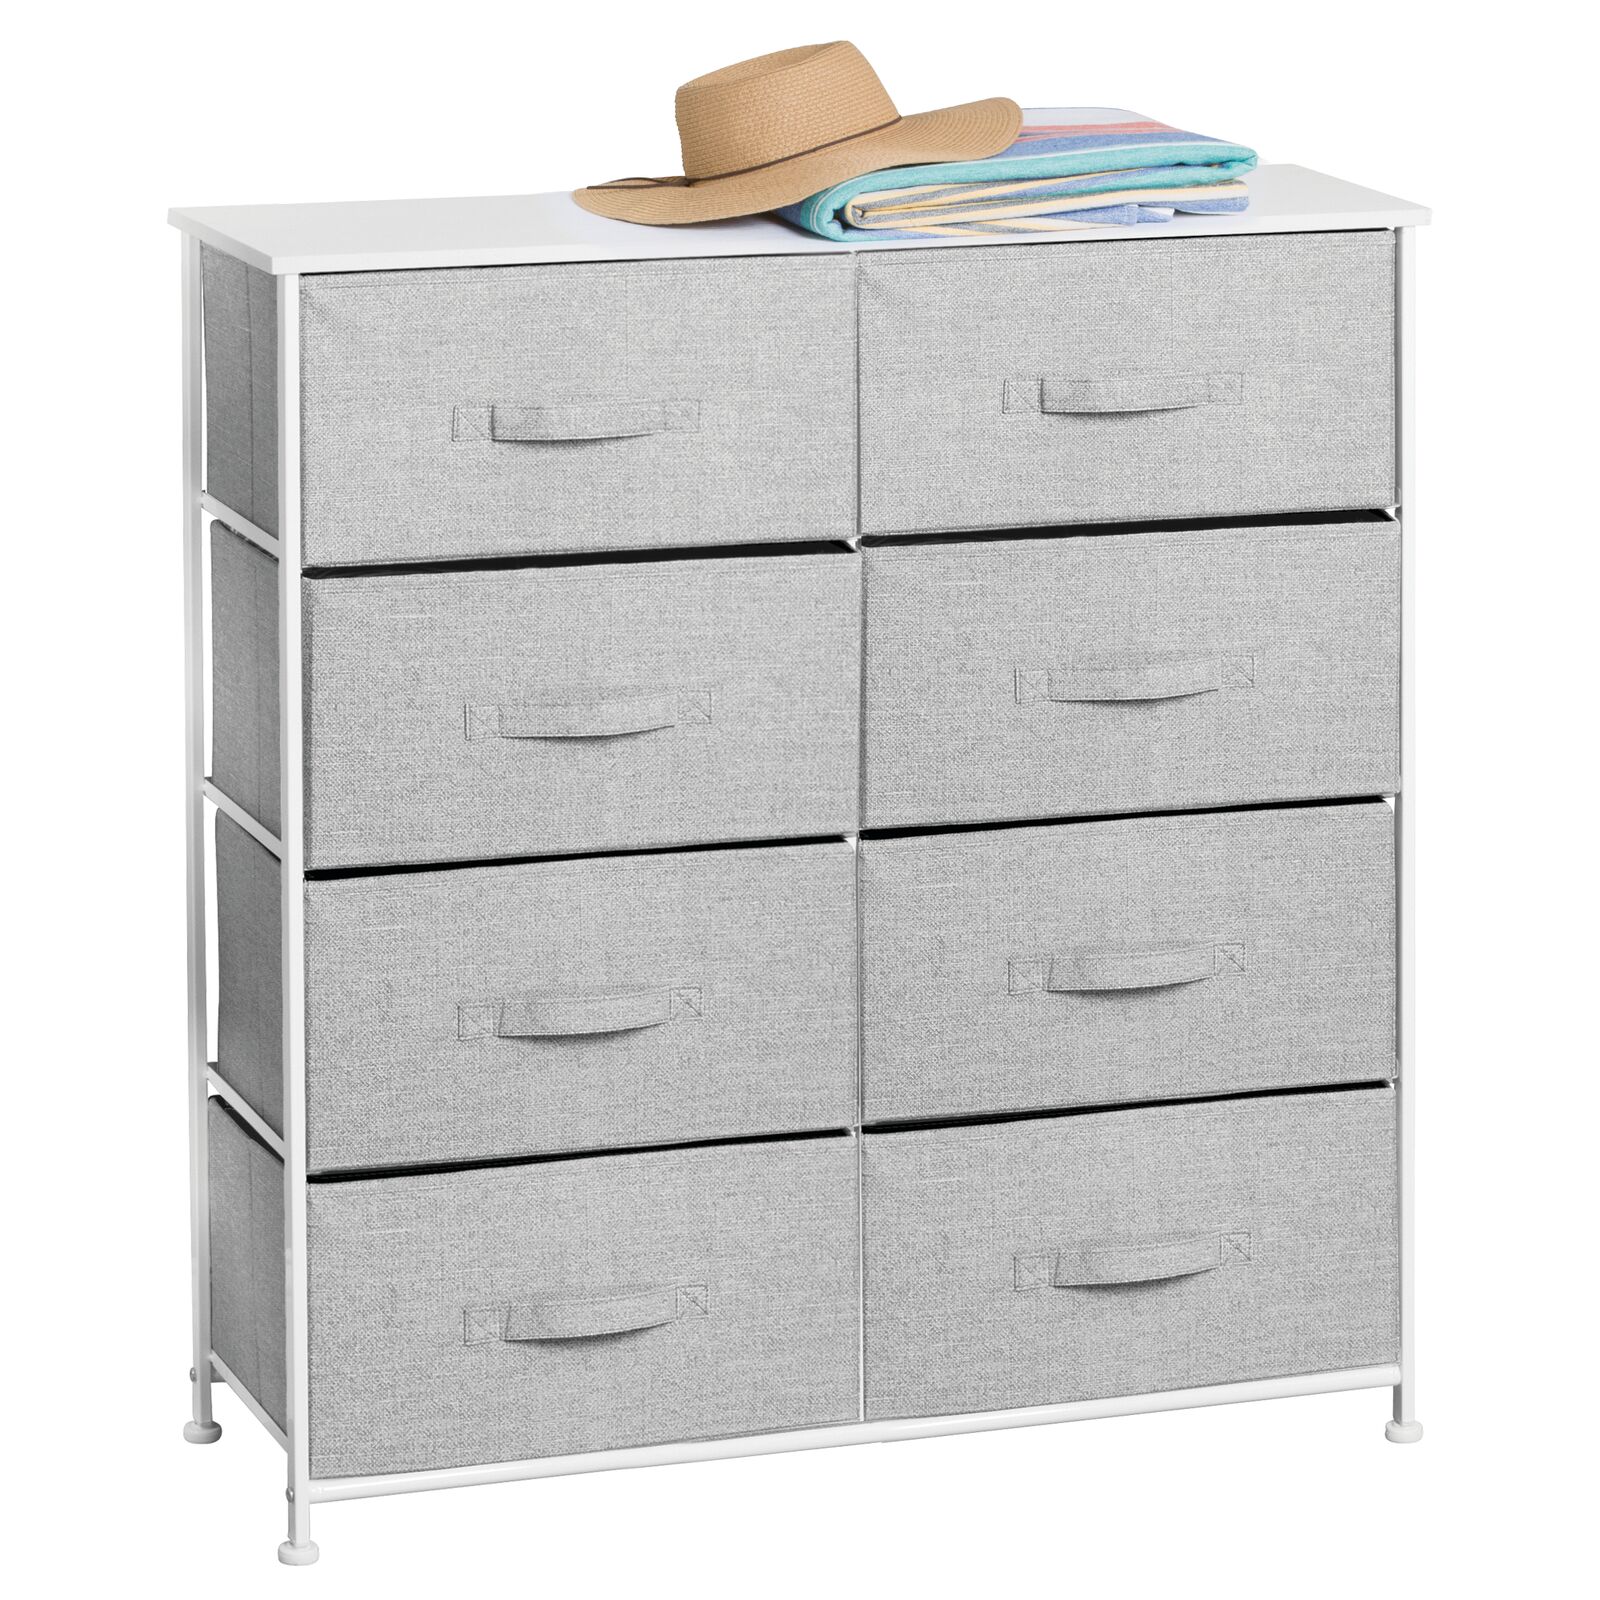 mDesign Large Storage Dresser Furniture with 8 Removable Fabric Drawers, Gray - image 1 of 6